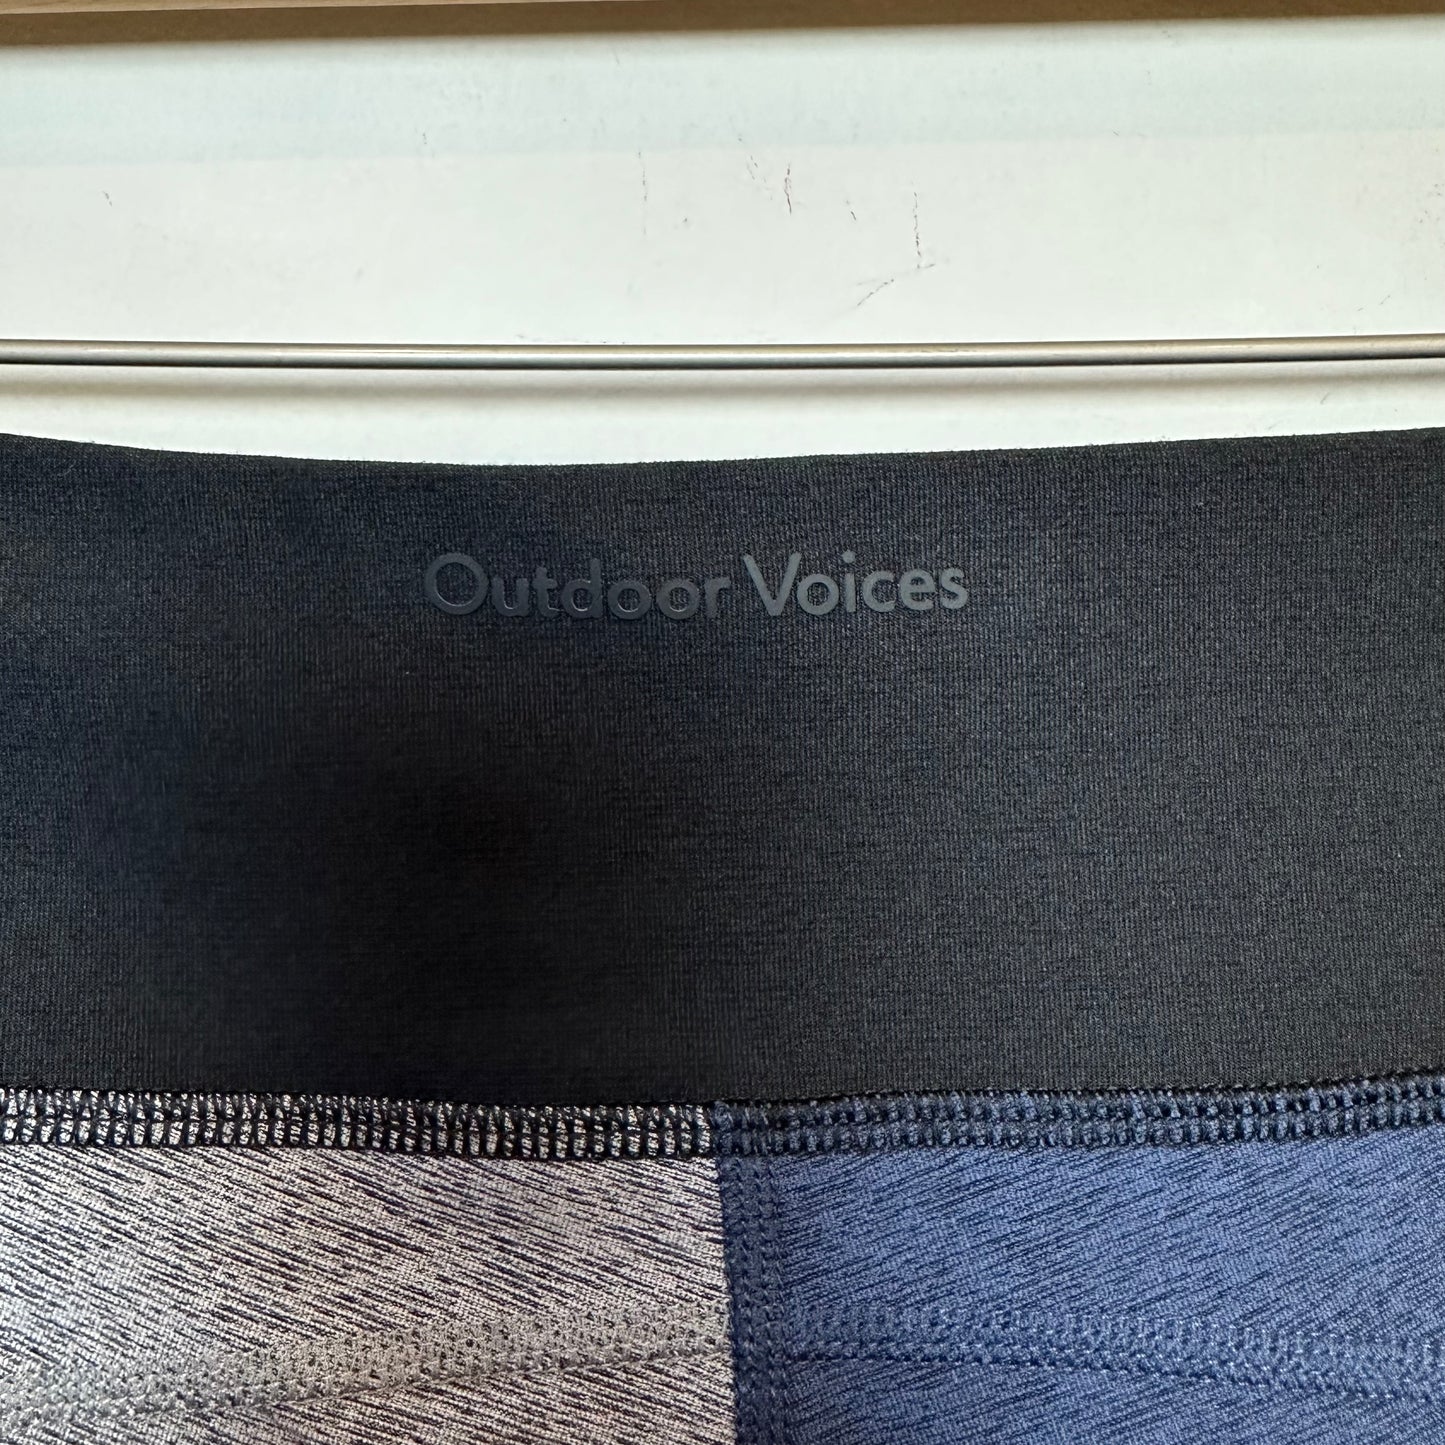 Outdoor Voices Warmup 5" Short Color Block Blue, Black, Gray Bike Shorts Small